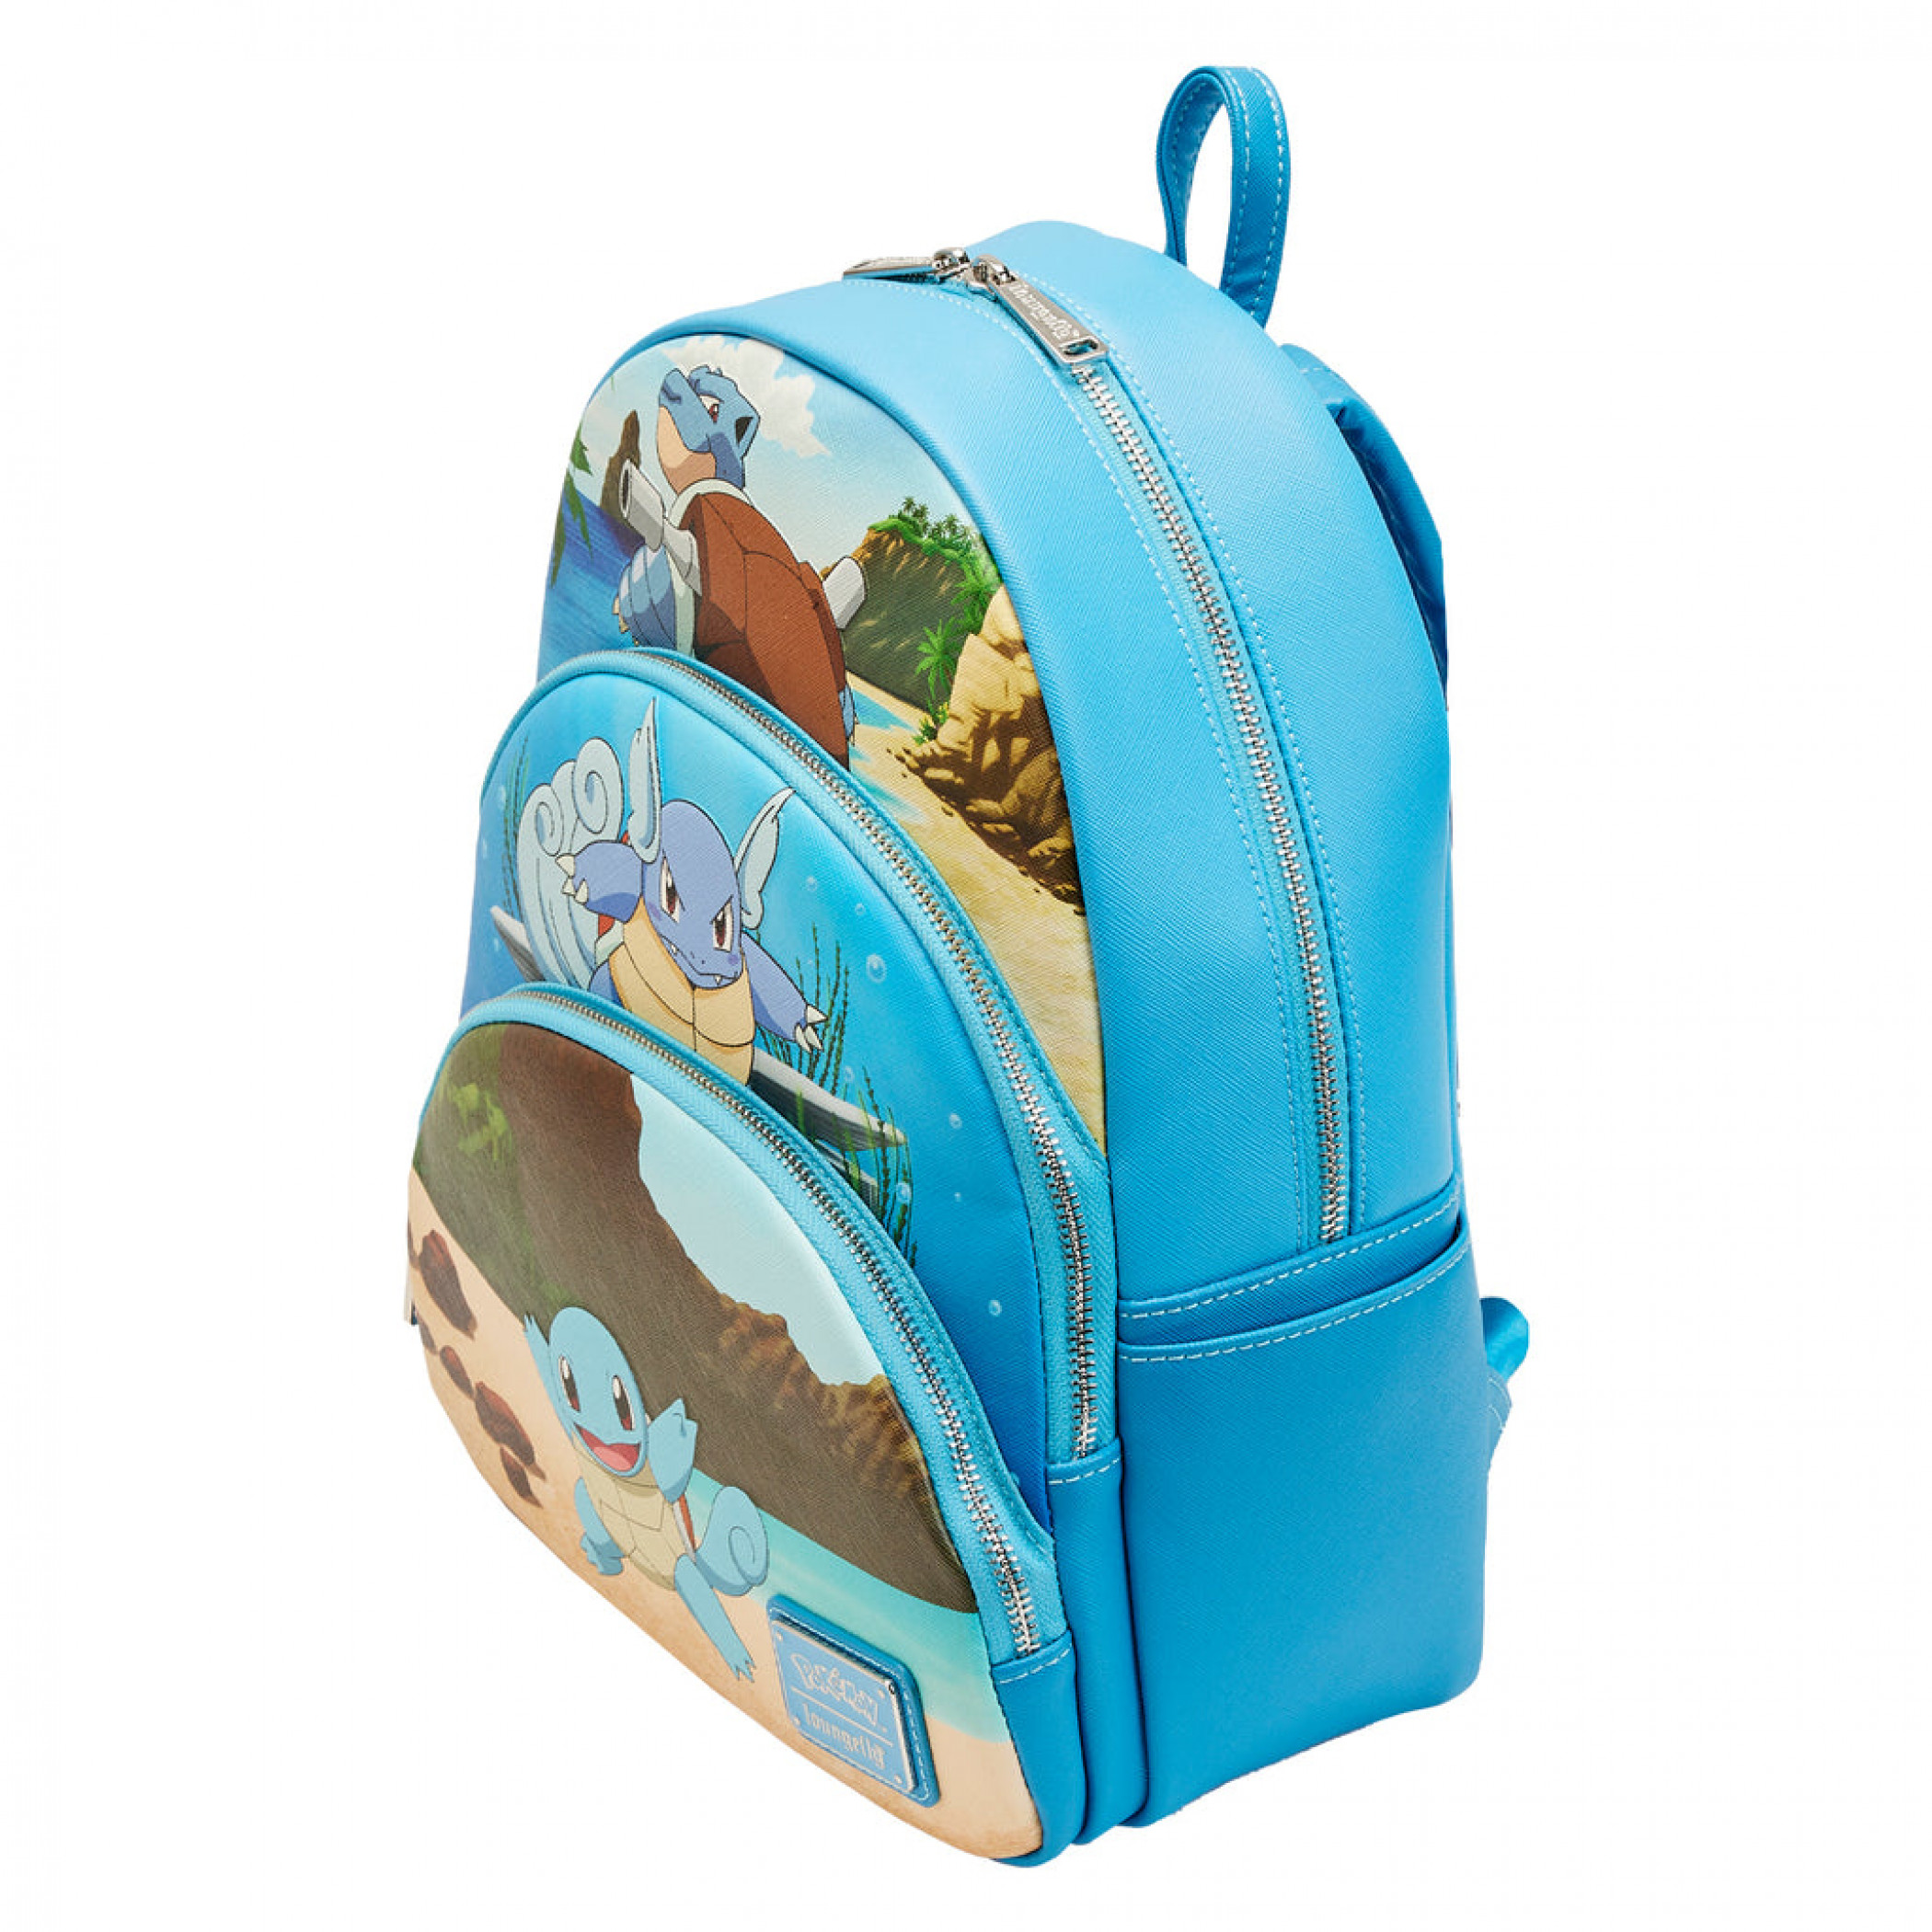 Pokémon Squirtle Evolutions Mini Backpack by Loungefly